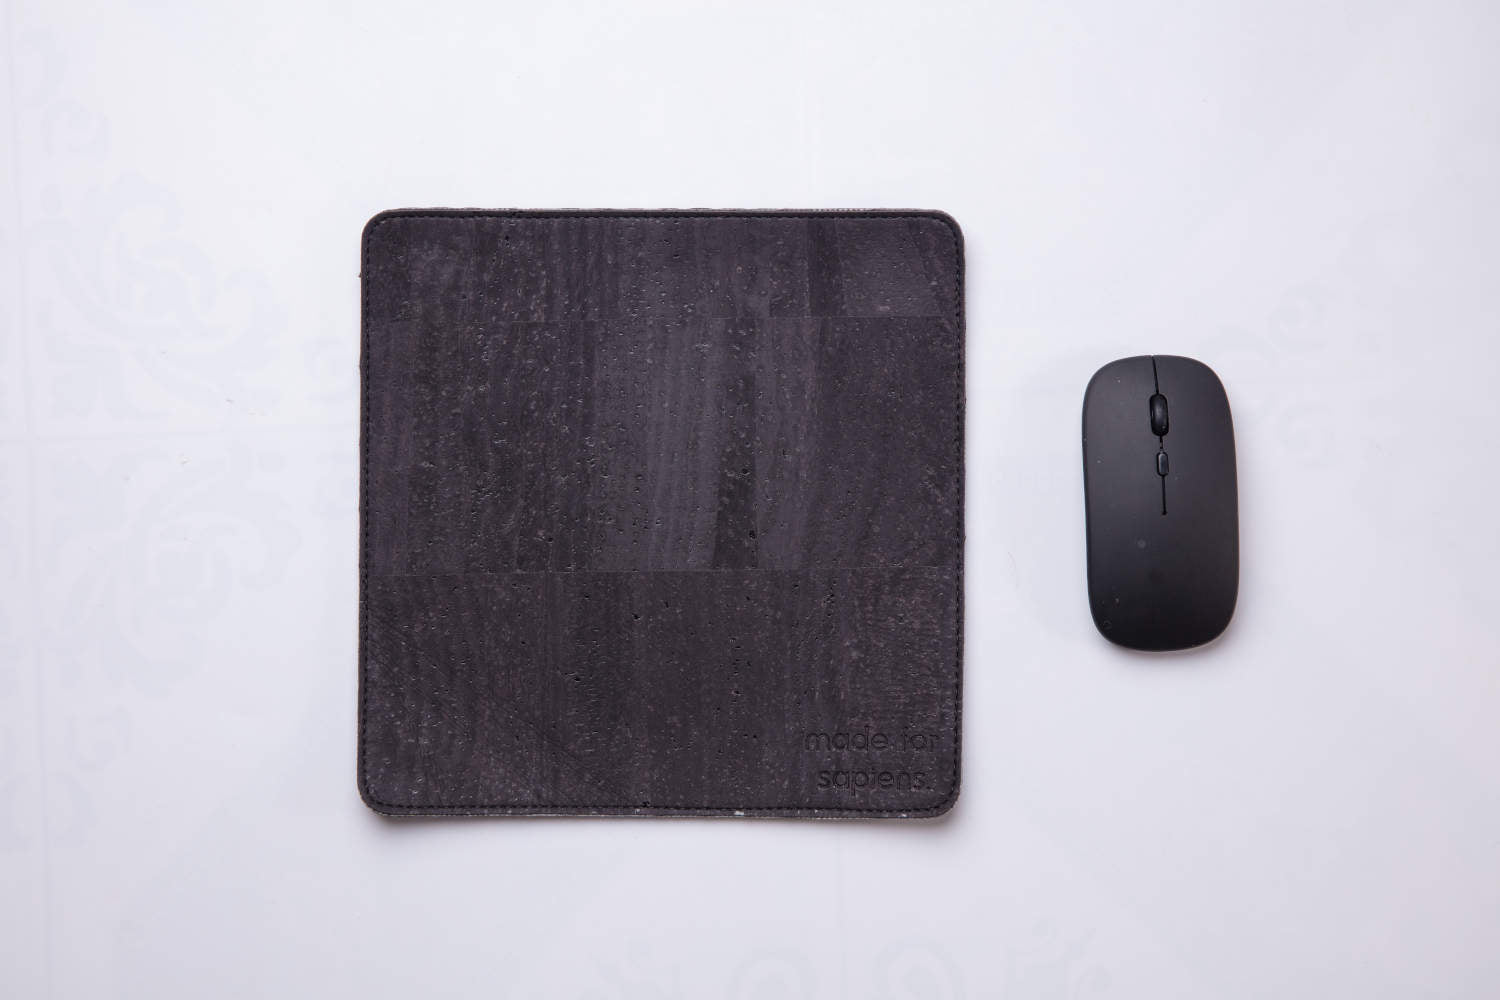 Black travel mousepad with wireless mouse next to it